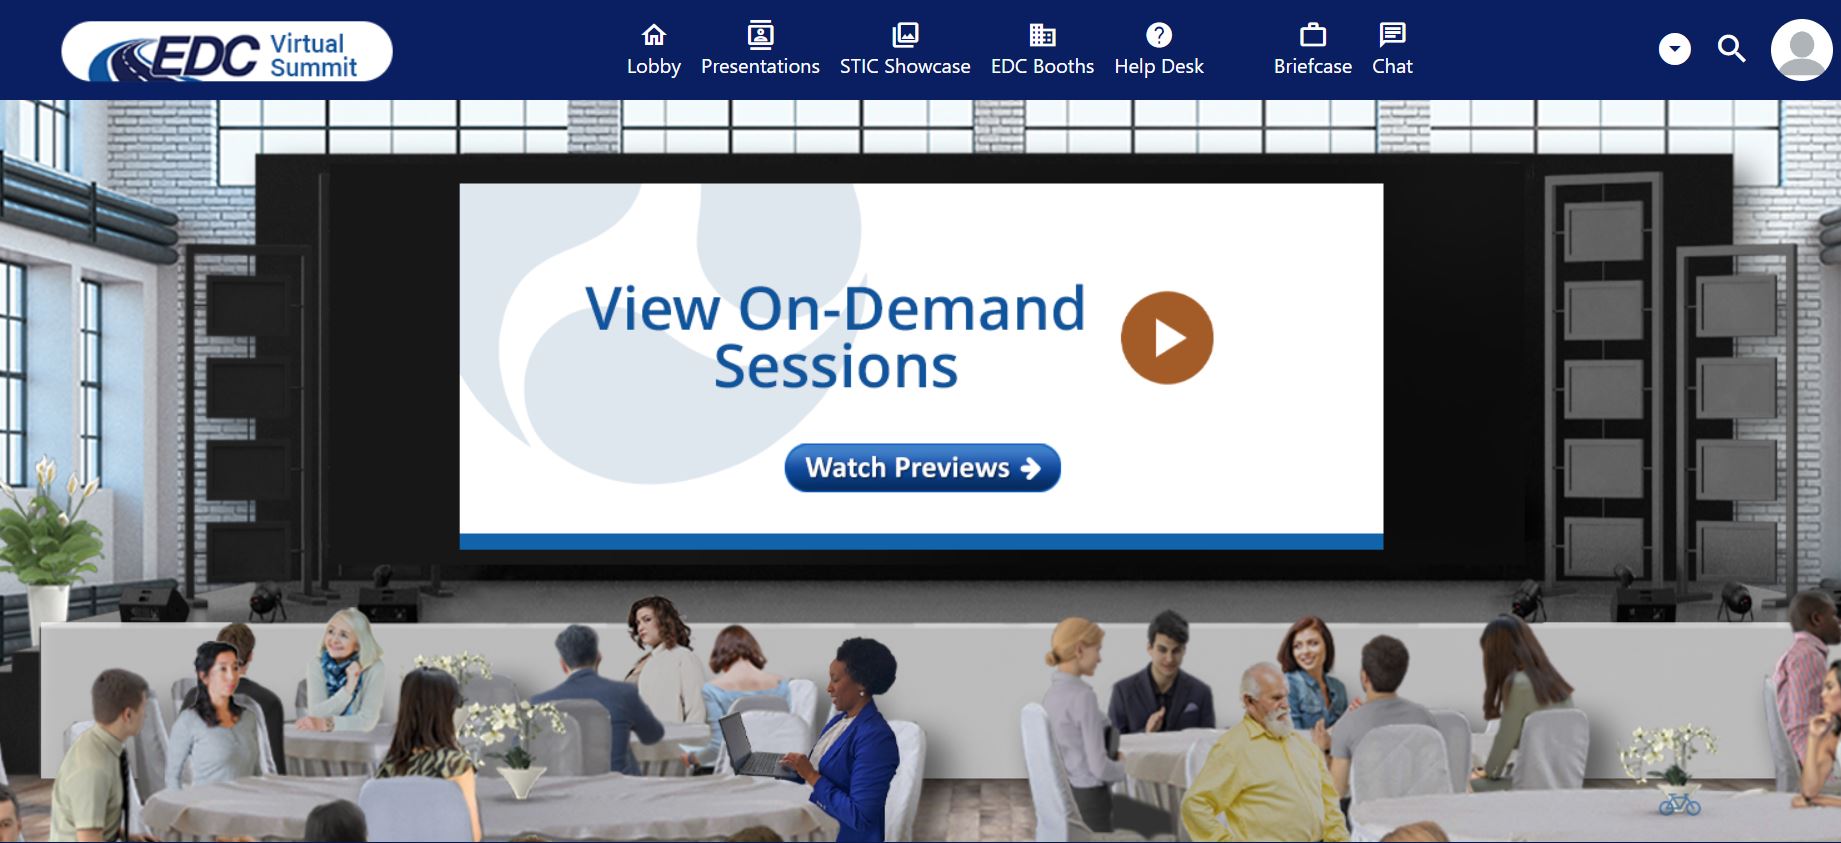 View On-Demand Sessions